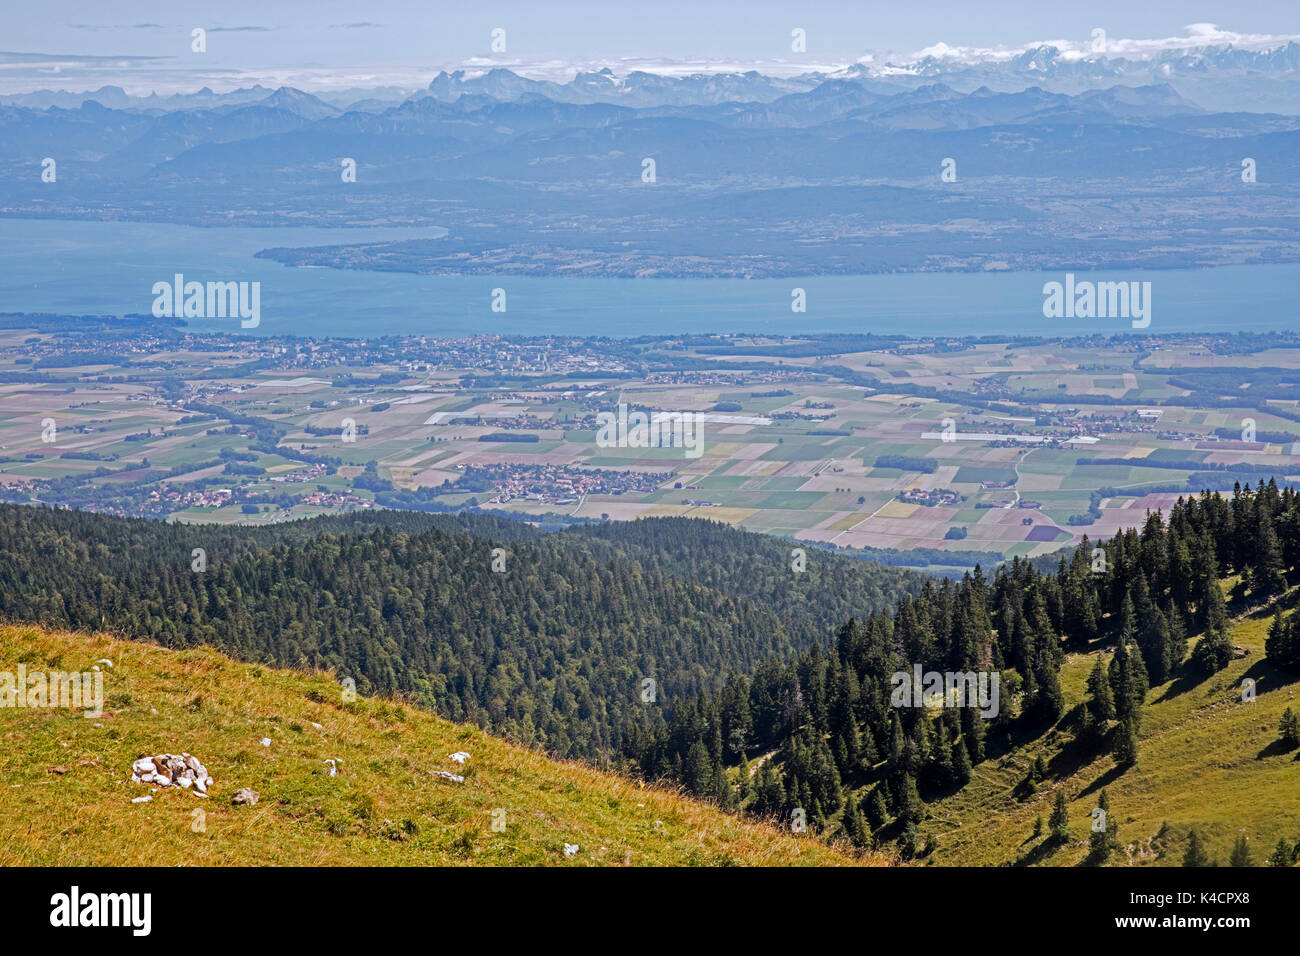 View from La Dôle, mountain of the Jura, canton of Vaud, overlooking Lake Geneva and Alpine mountain peaks of the Swiss Alps in Switzerland Stock Photo